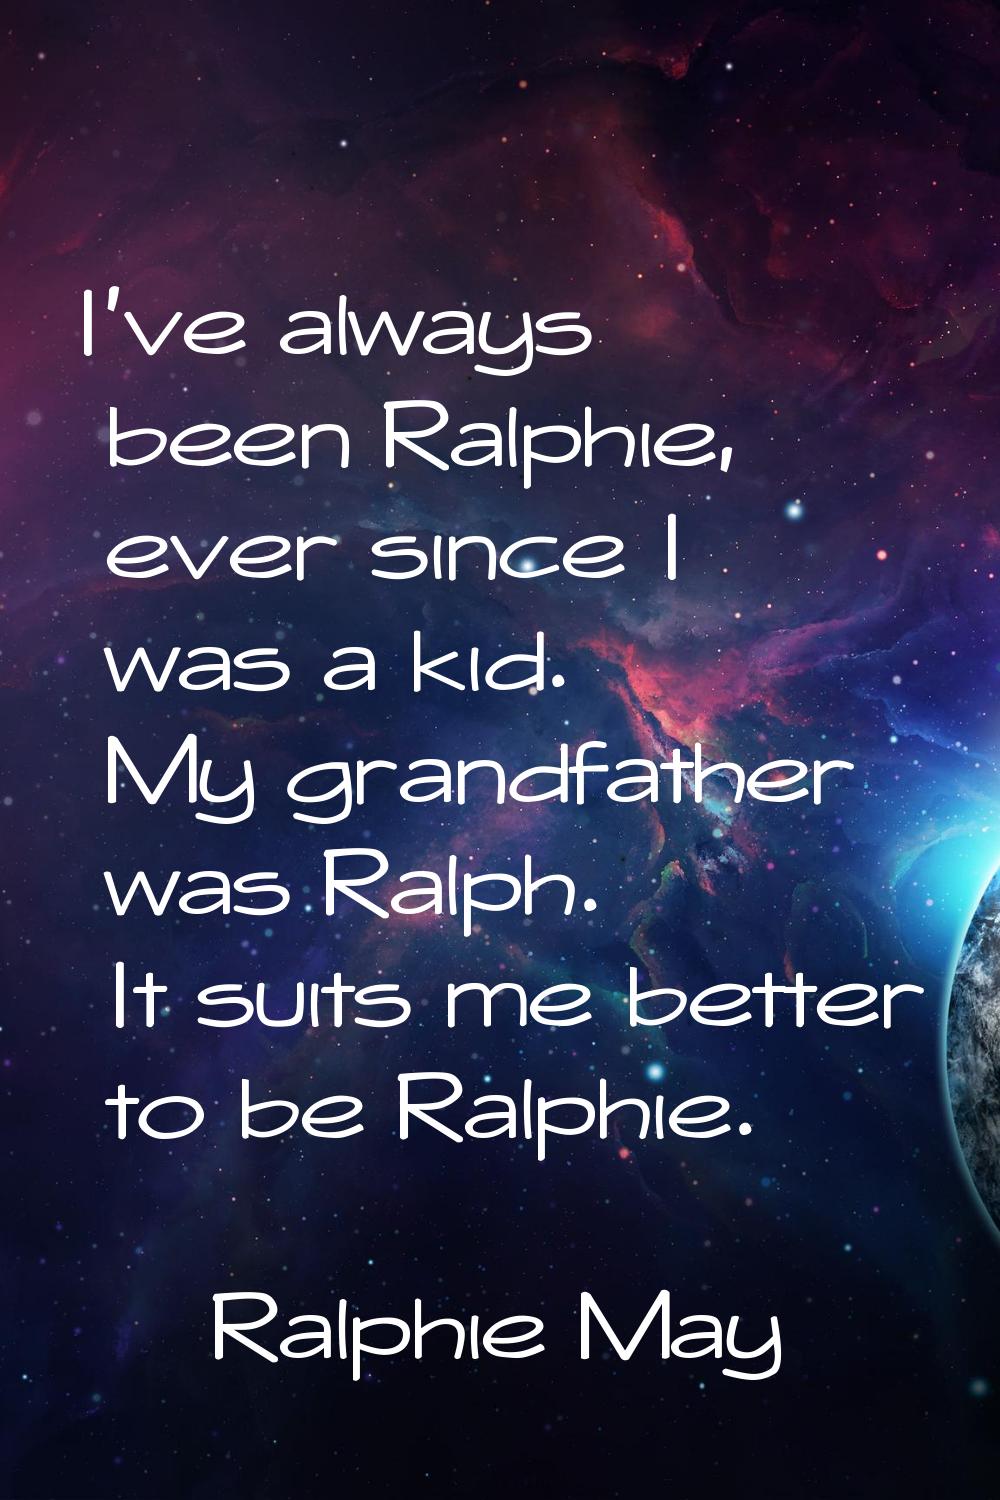 I've always been Ralphie, ever since I was a kid. My grandfather was Ralph. It suits me better to b